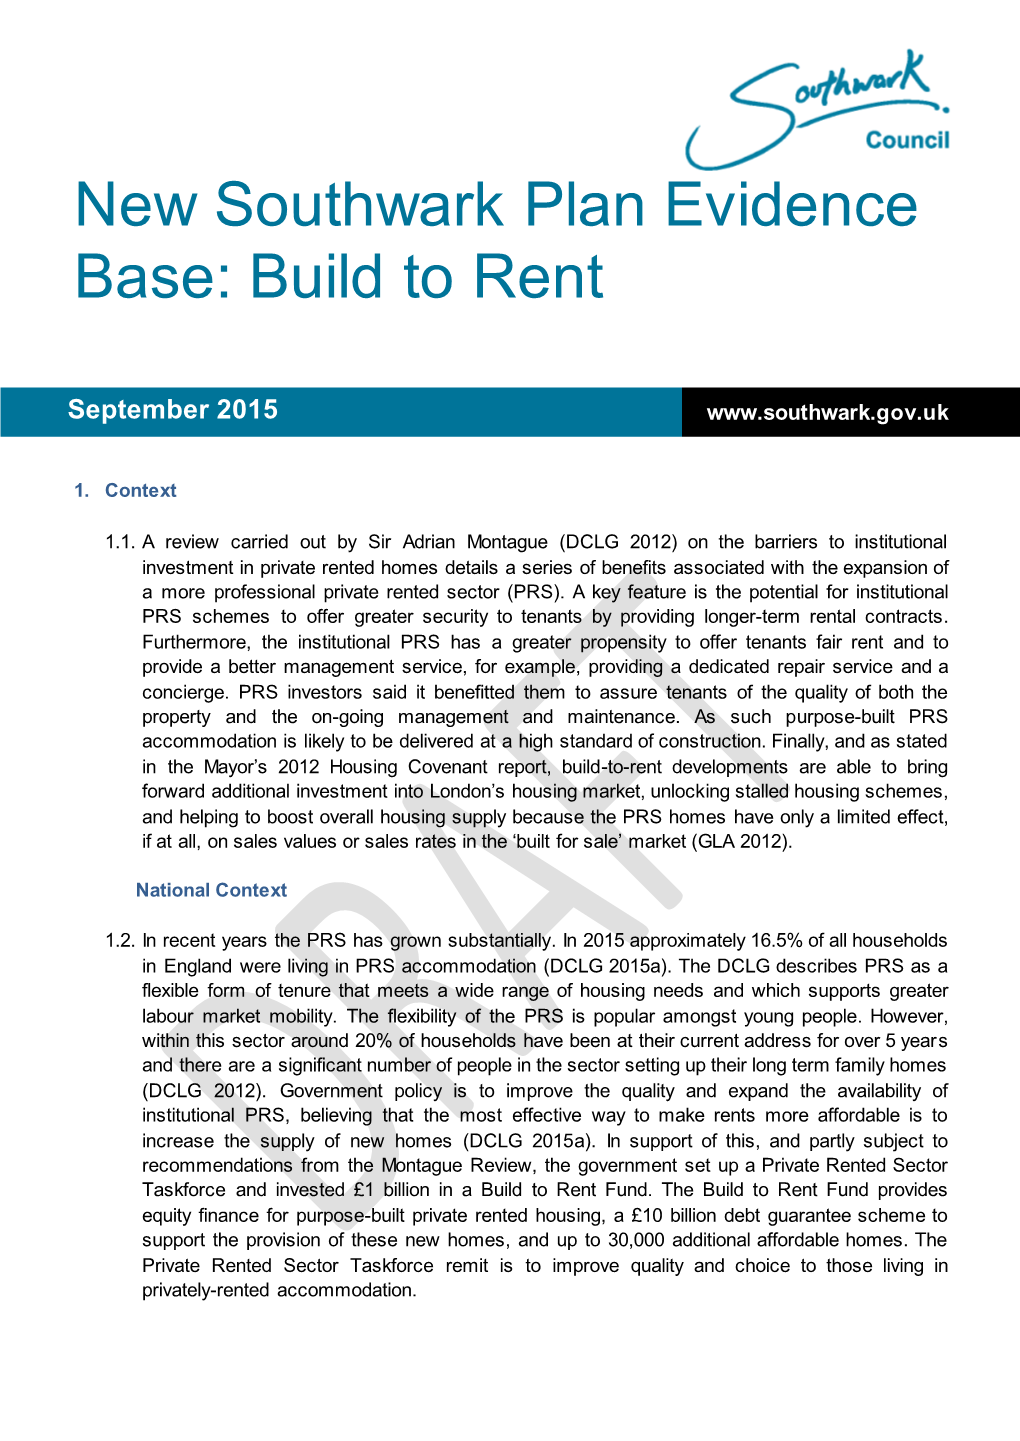 New Southwark Plan Evidence Base: Build to Rent